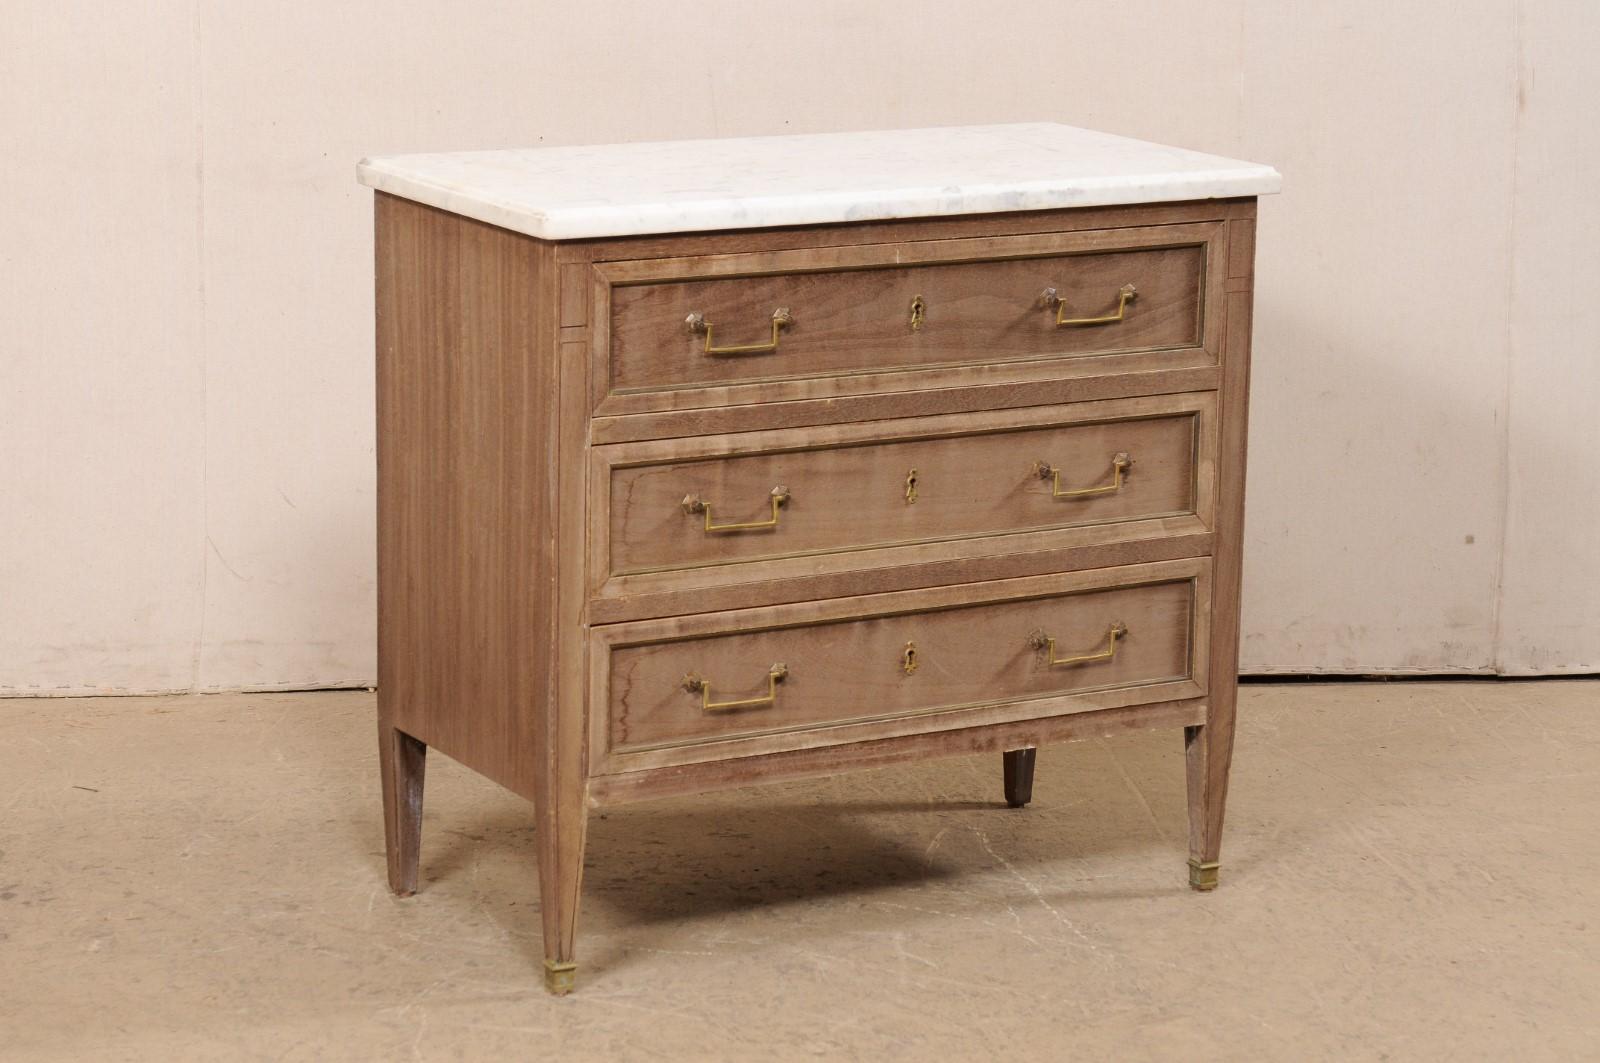 A French neoclassical-style three-drawer commode with brass accents and white marble top. This vintage chest from France features a rectangular-shaped marble top which slightly overhangs the case below which houses three graduated drawers, a